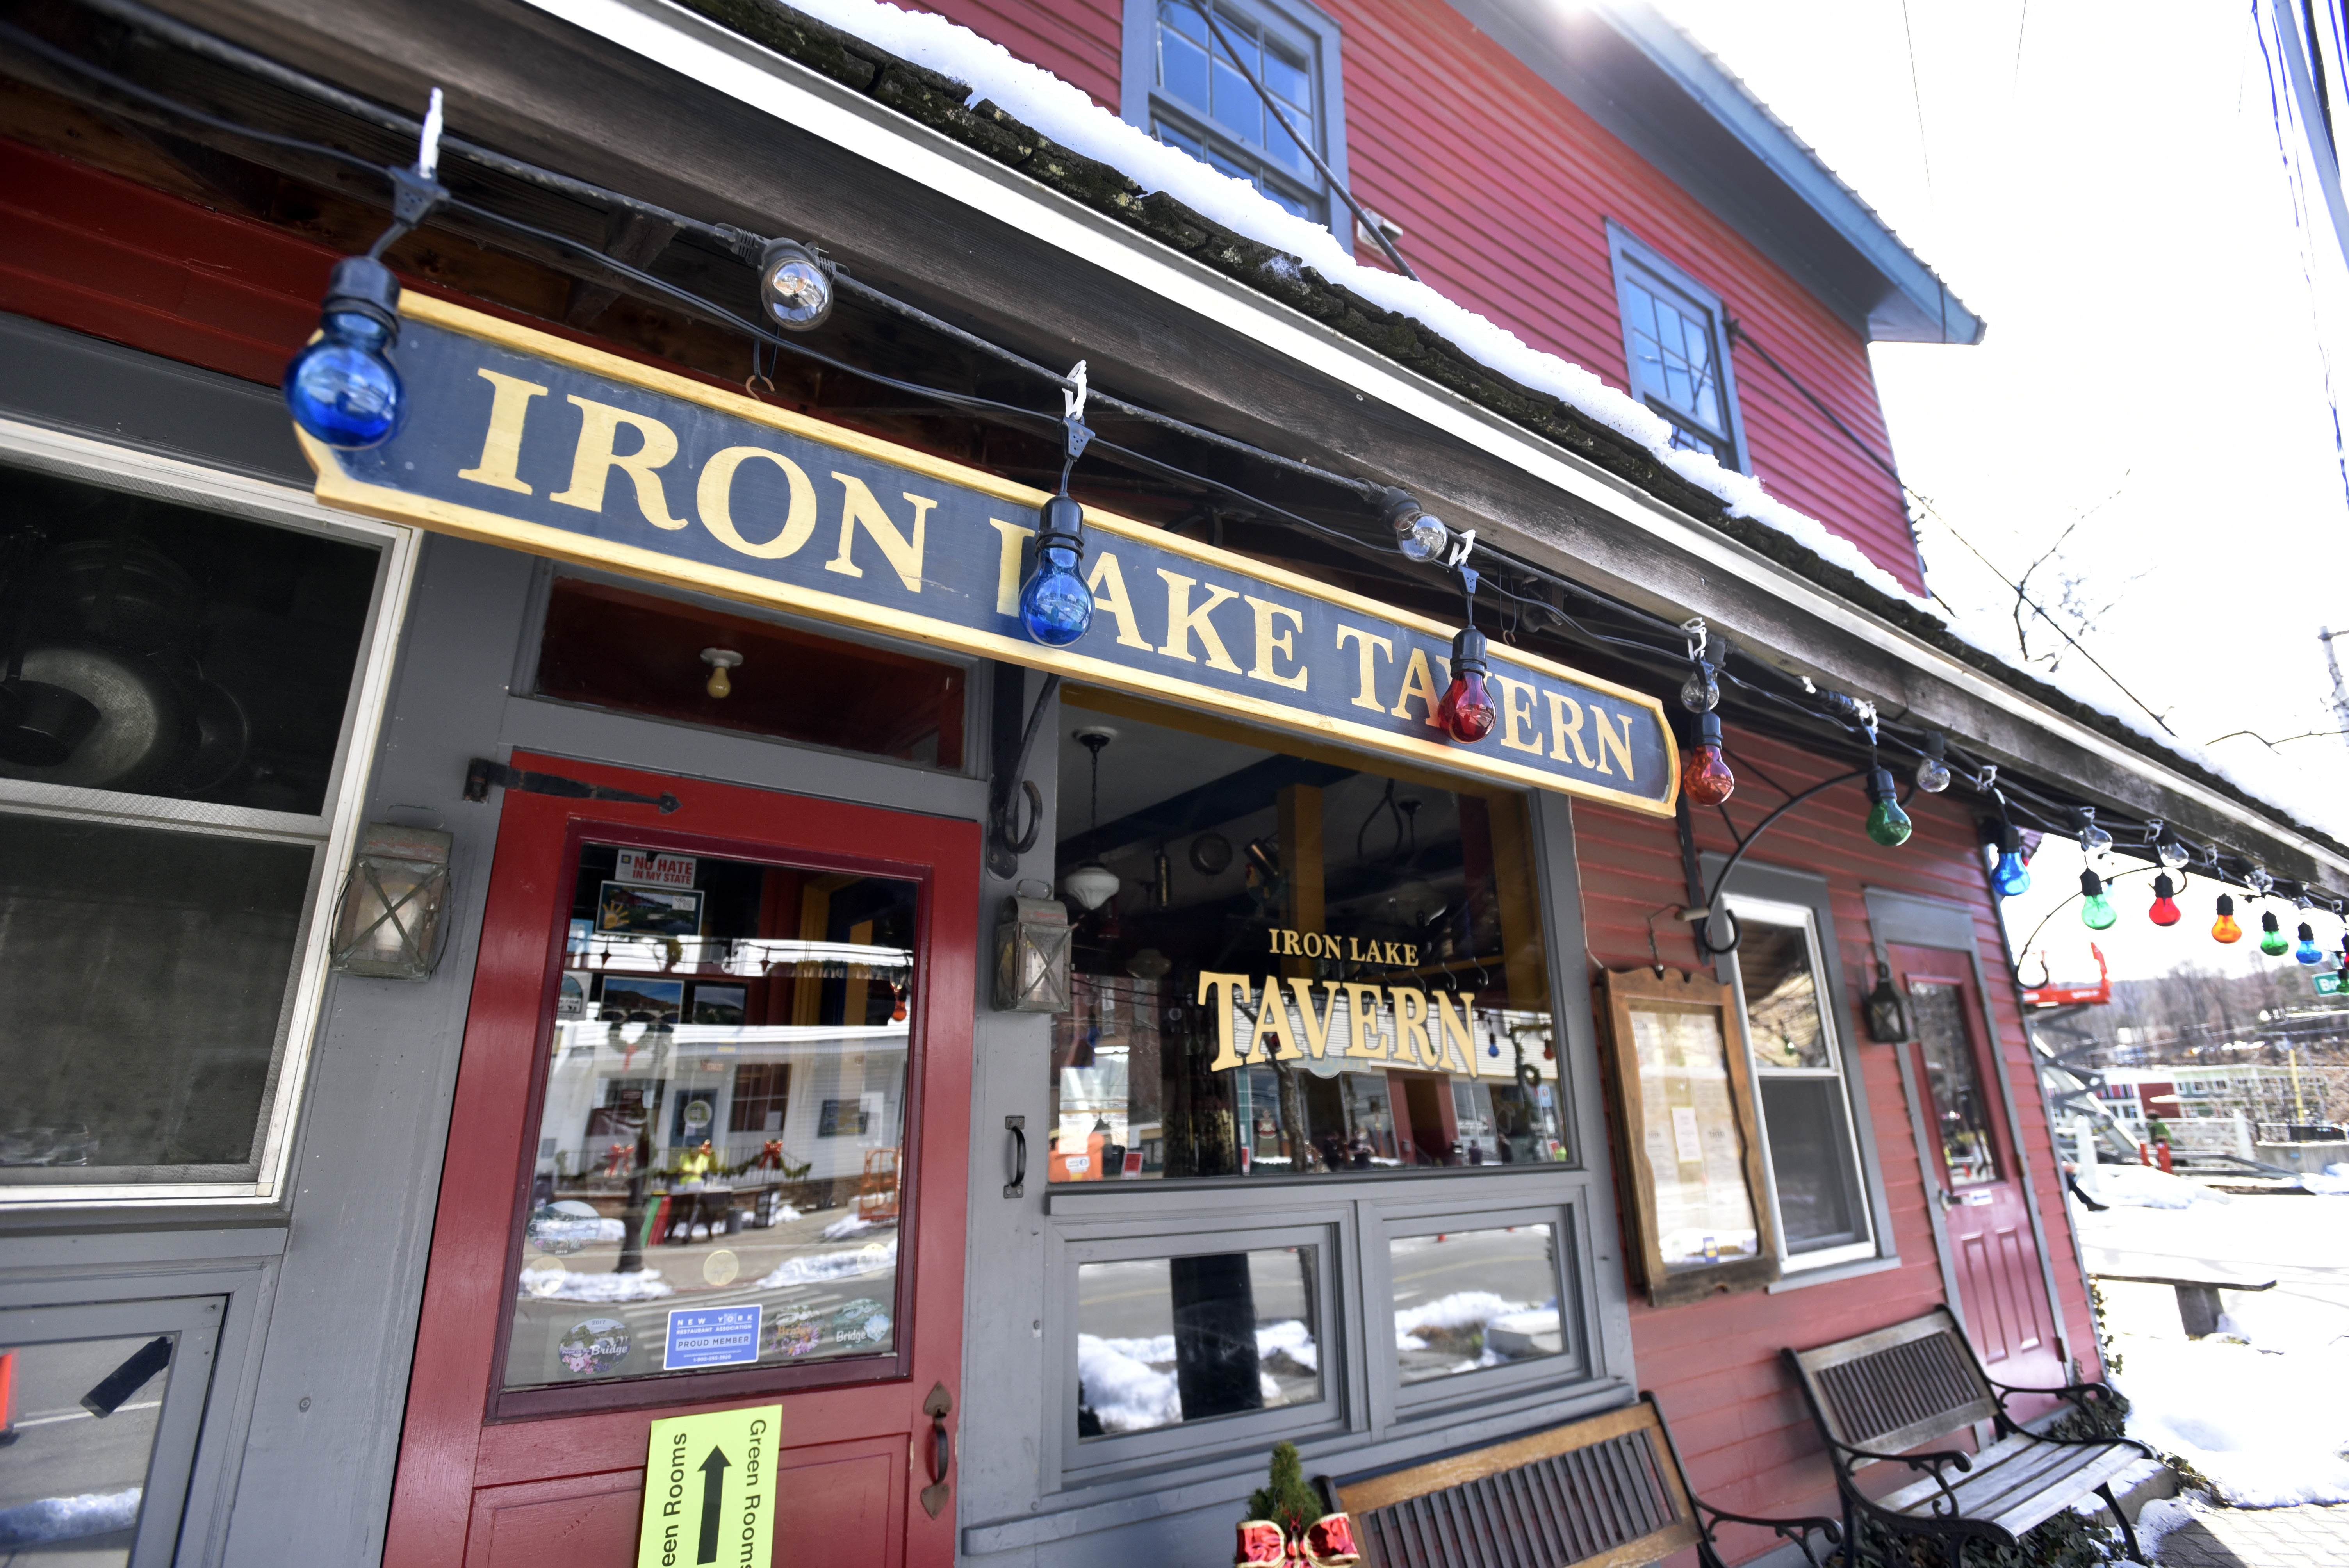 The West End Pub at the end of the Bridge of Flowers in Shelburne Falls has been transformed into the fictional Iron Lake Tavern during the filming of the show Dexter, April 7, 2021.   (Don Treeger / The Republican)